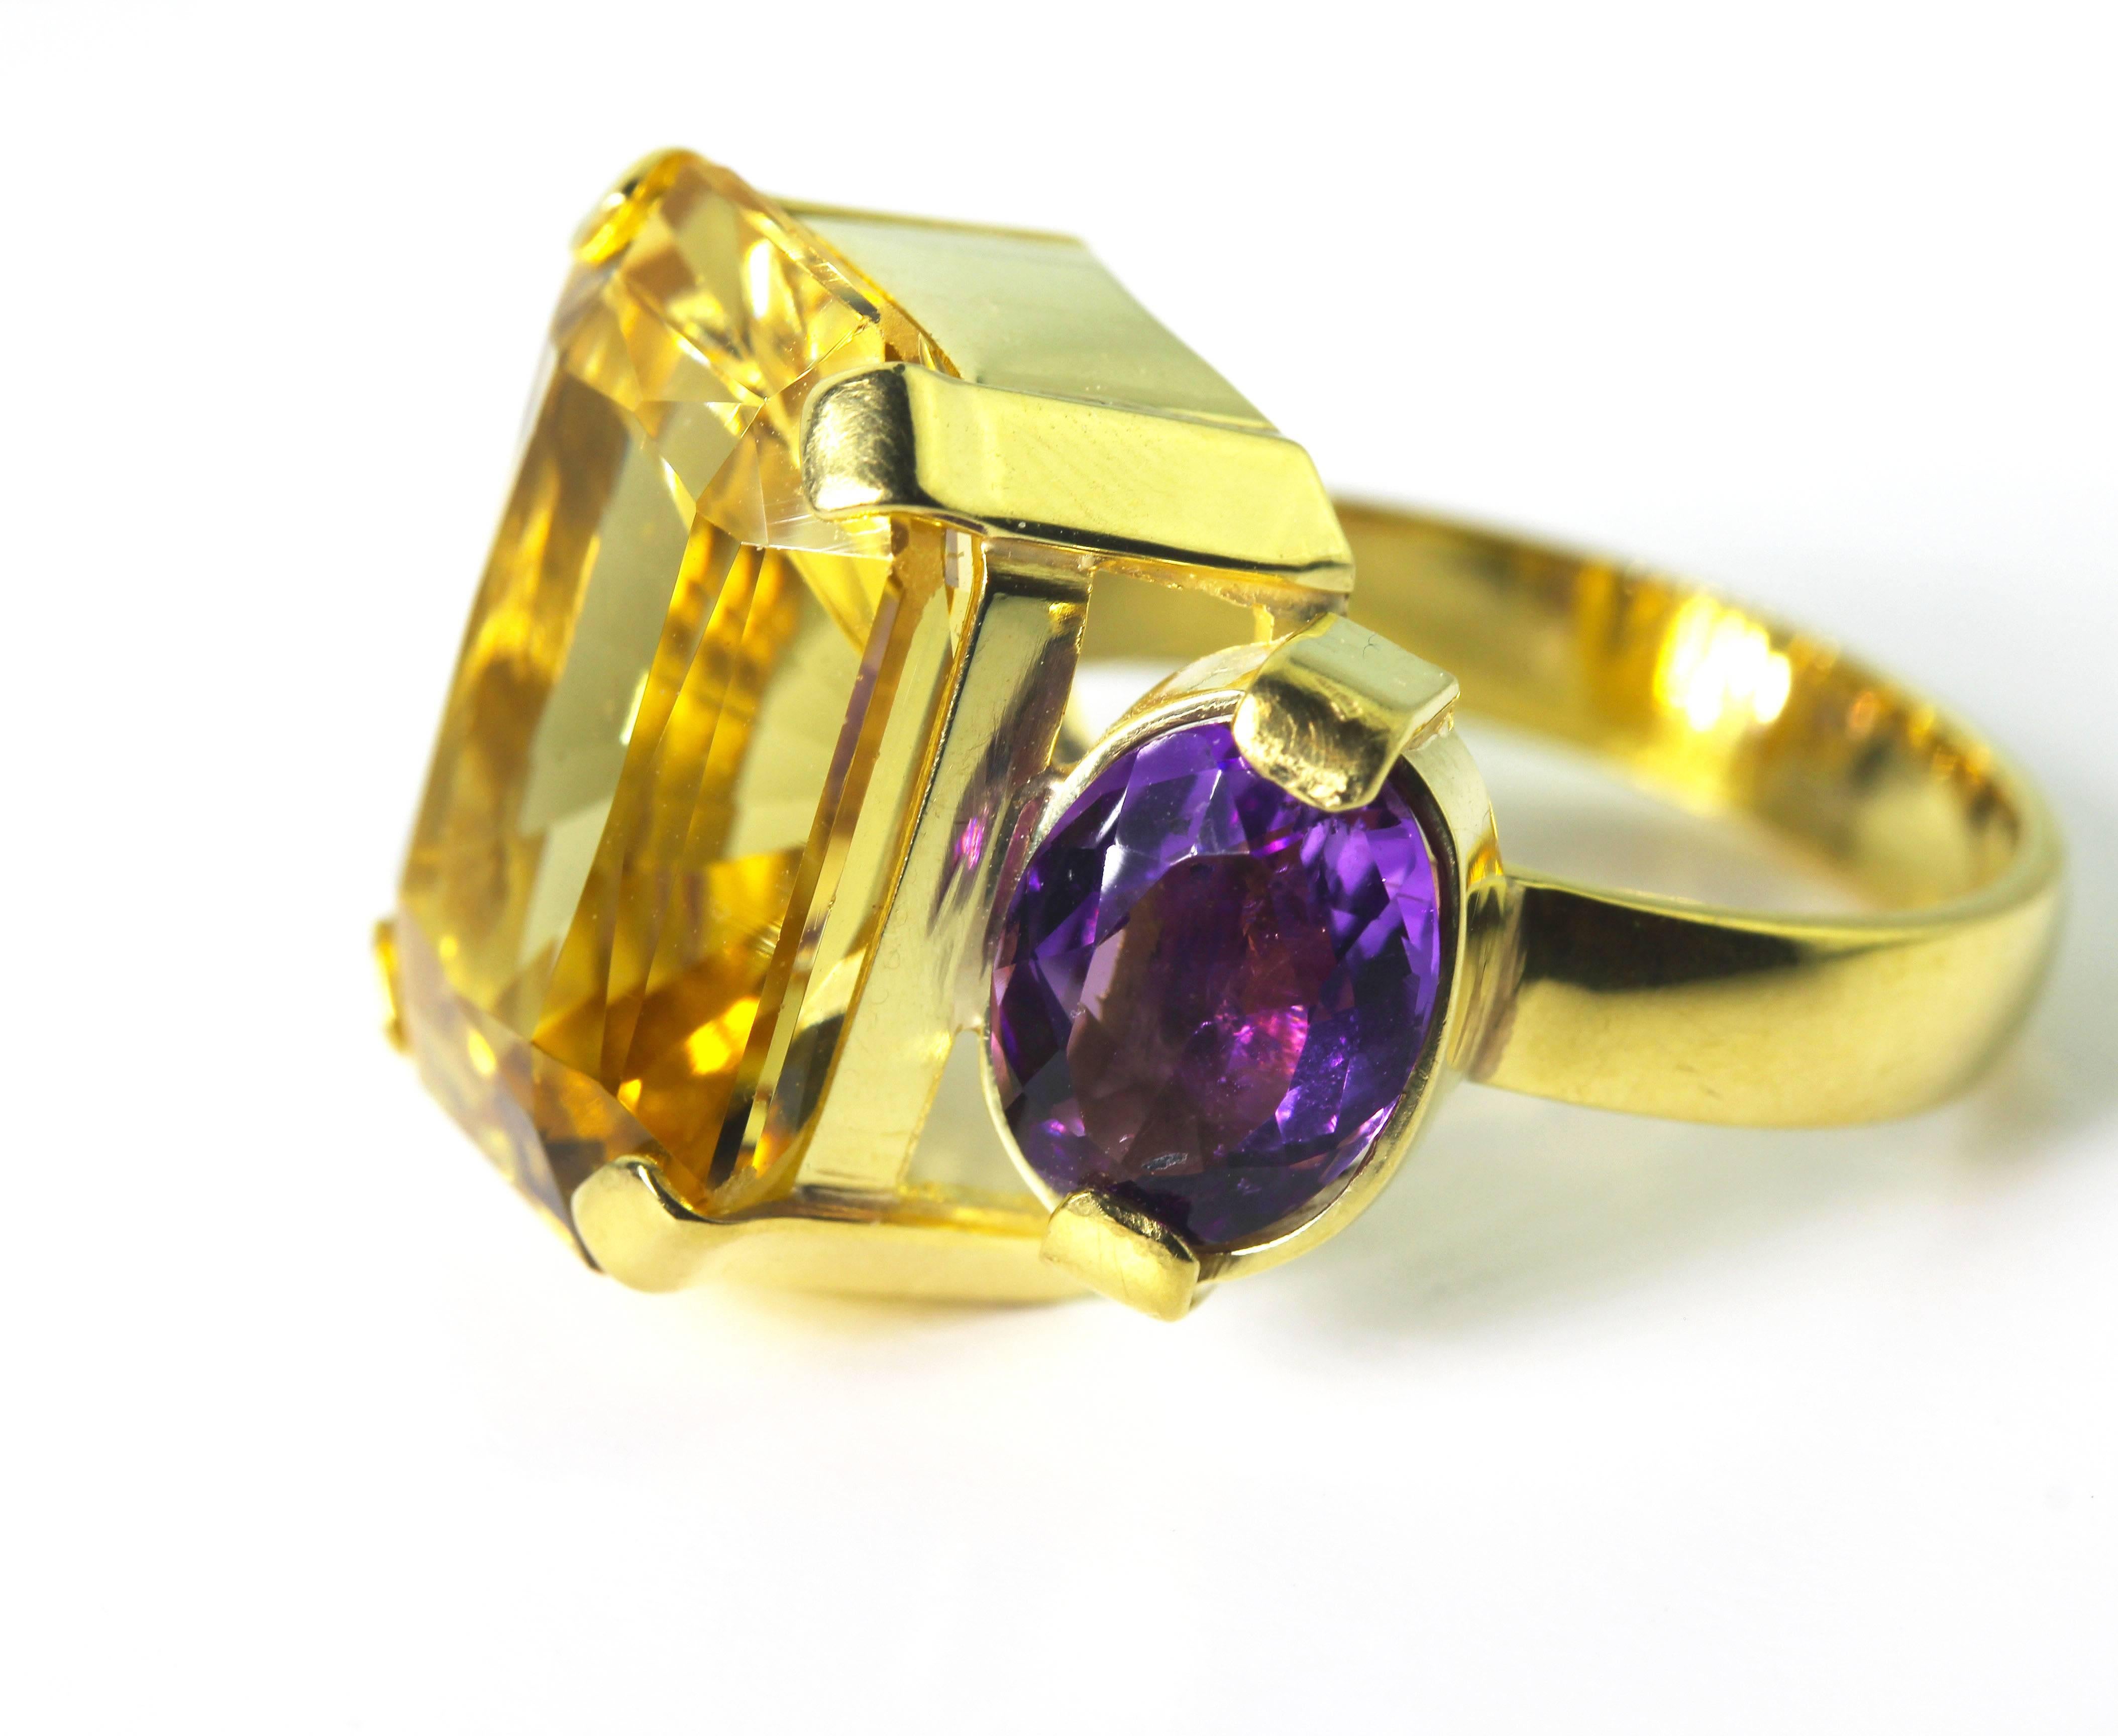 This brilliant clear gem cut huge 13.5 Carat Heliodor Beryl is enhanced with 2.6 Carats of sparkling Amethysts set in this handmade unique 18 Karat yellow gold ring size 7 (sizable).  More from this seller by putting gemjunky into 1stdibs search bar.